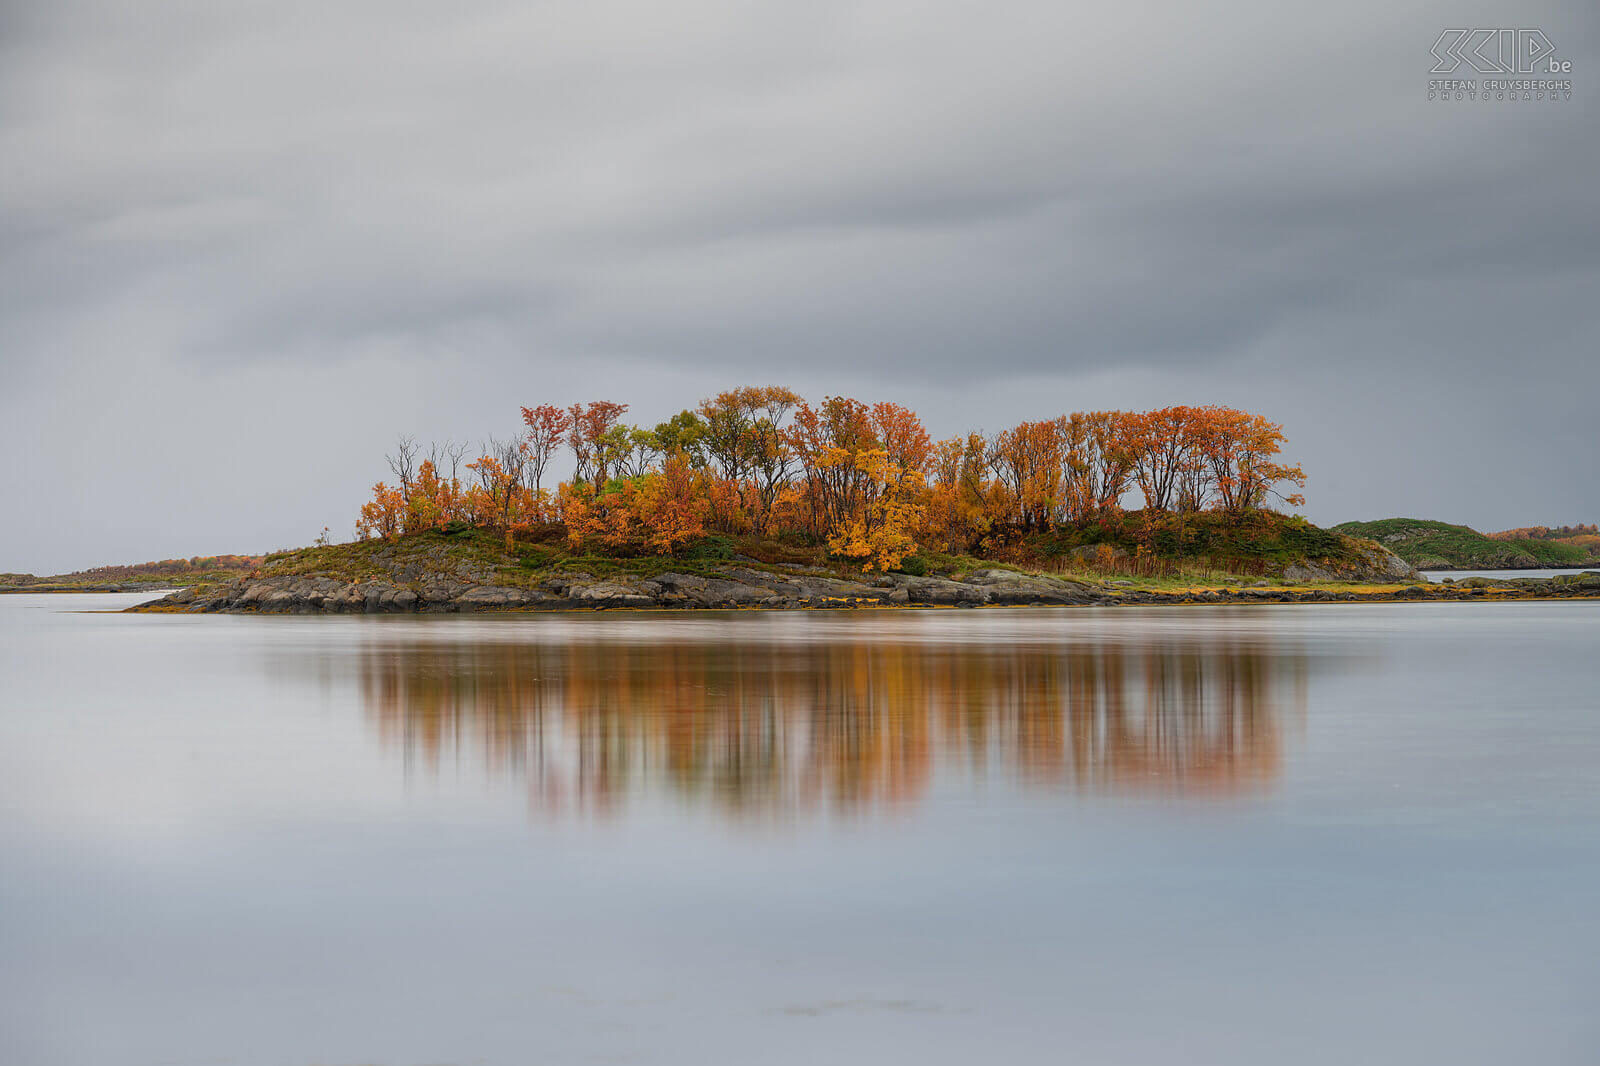 Norway - Senja - Hamn - Reflection Autumn colors and their reflection on a small island off the coast of Senja Stefan Cruysberghs